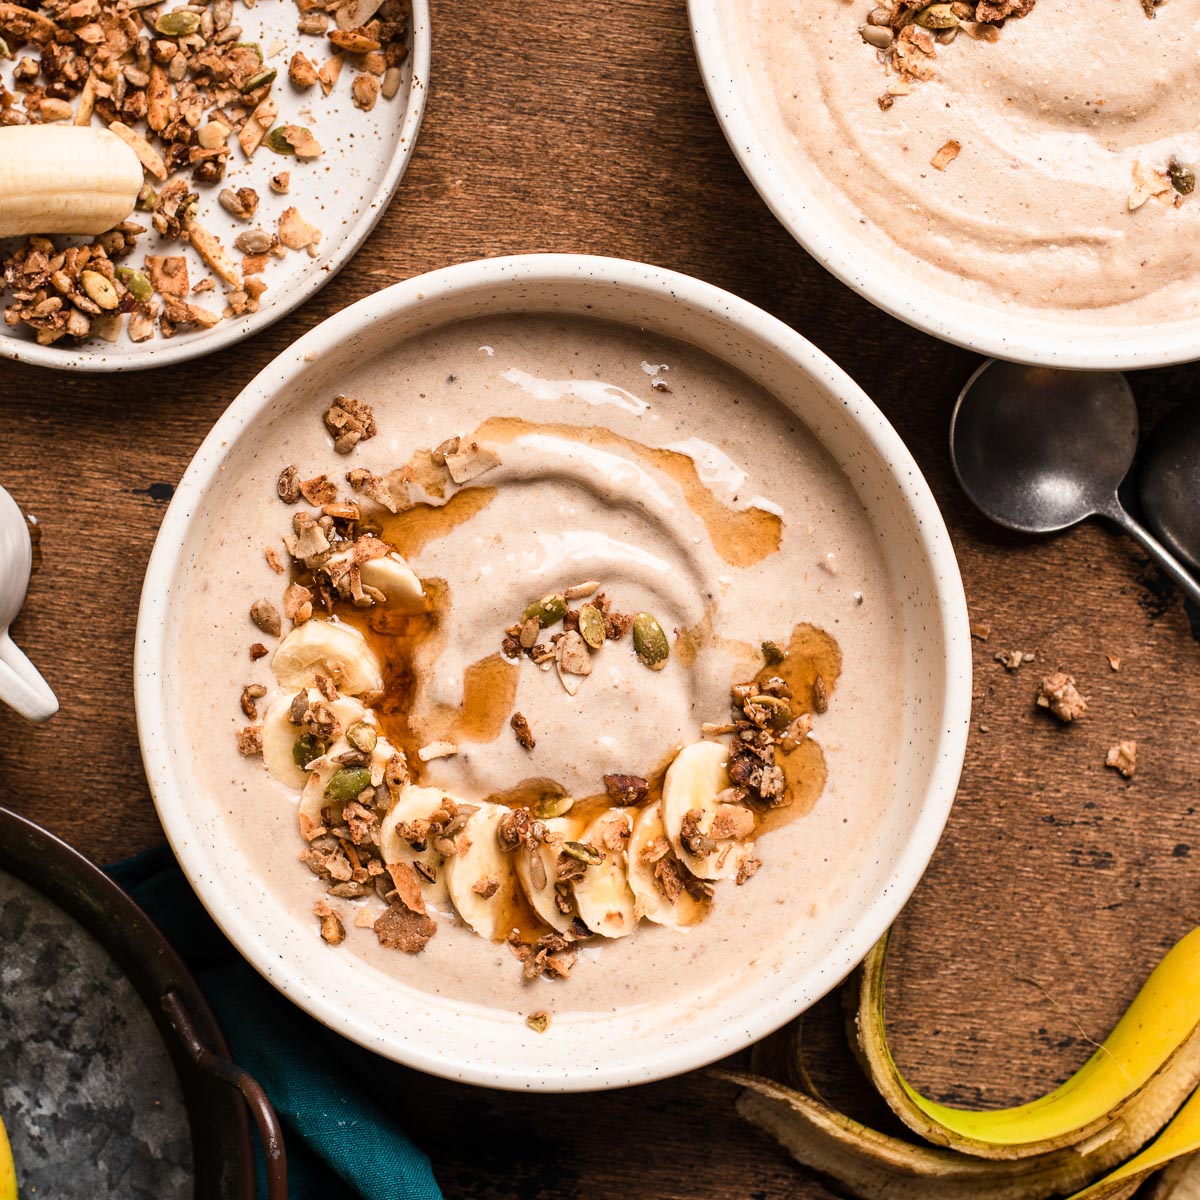 2 oat smoothie bowls topped with maple syrup and granola, next to a bowl of granola and banana.